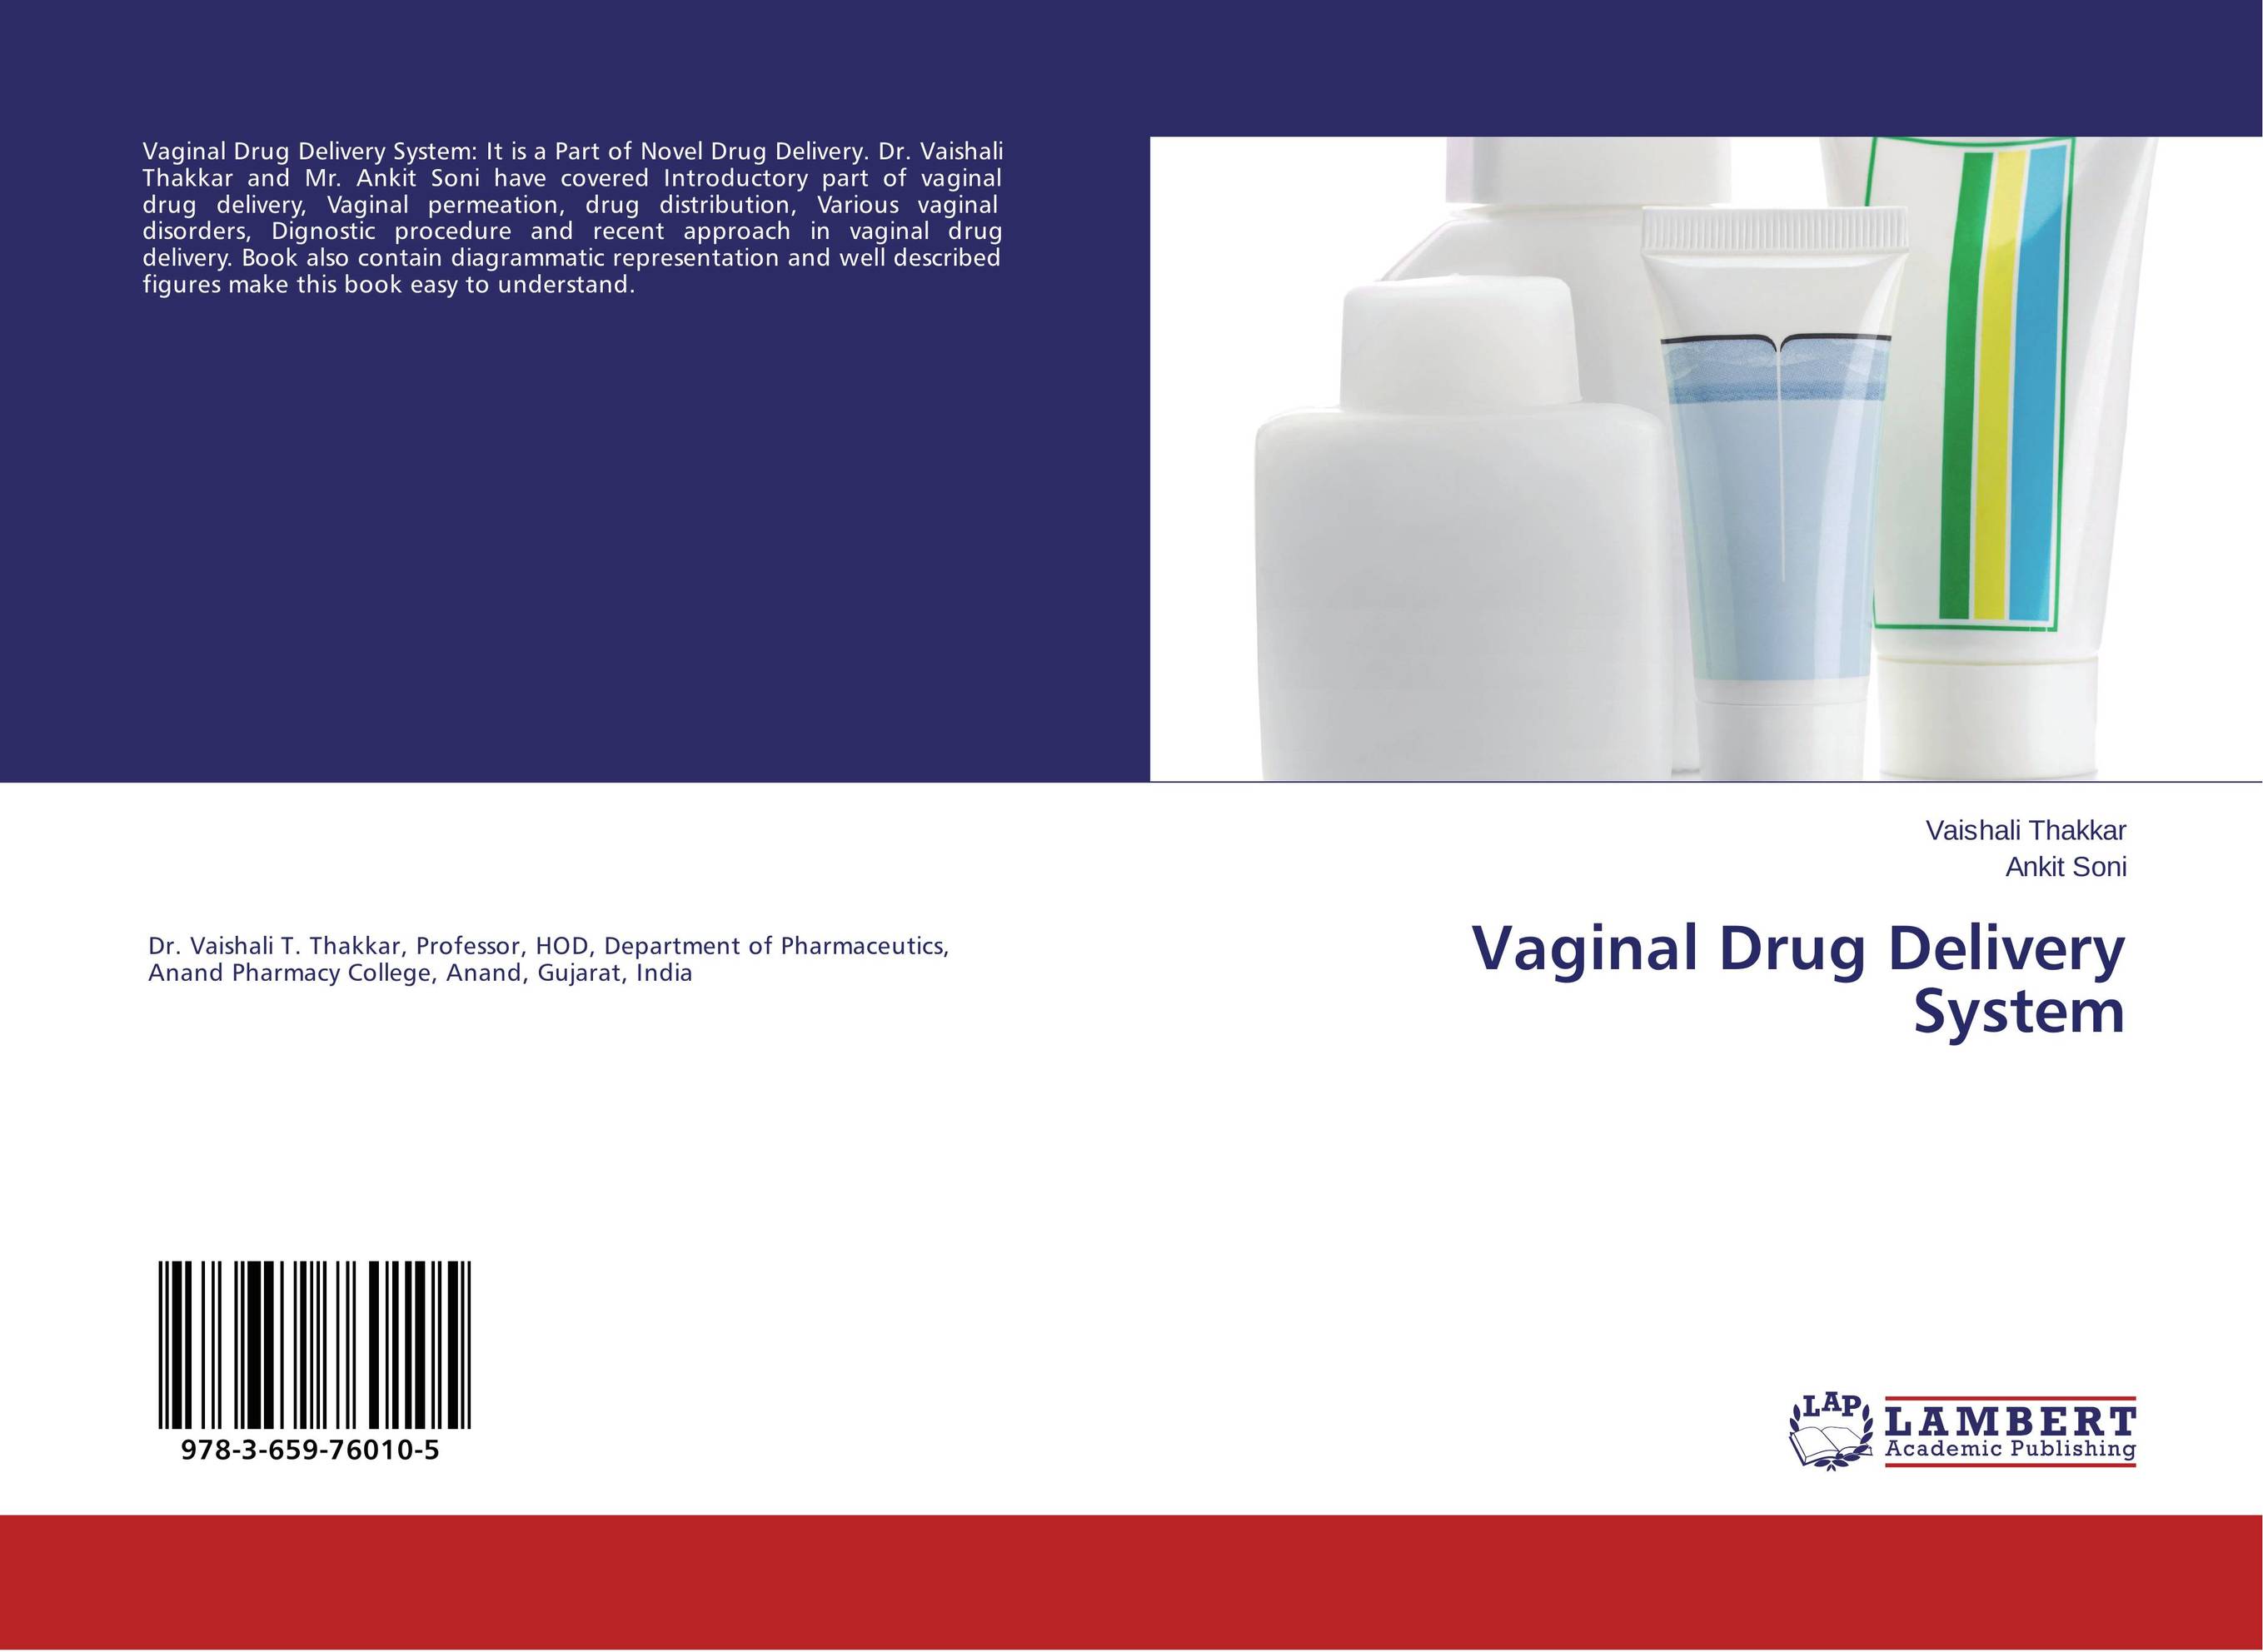 Vaginal delivery system